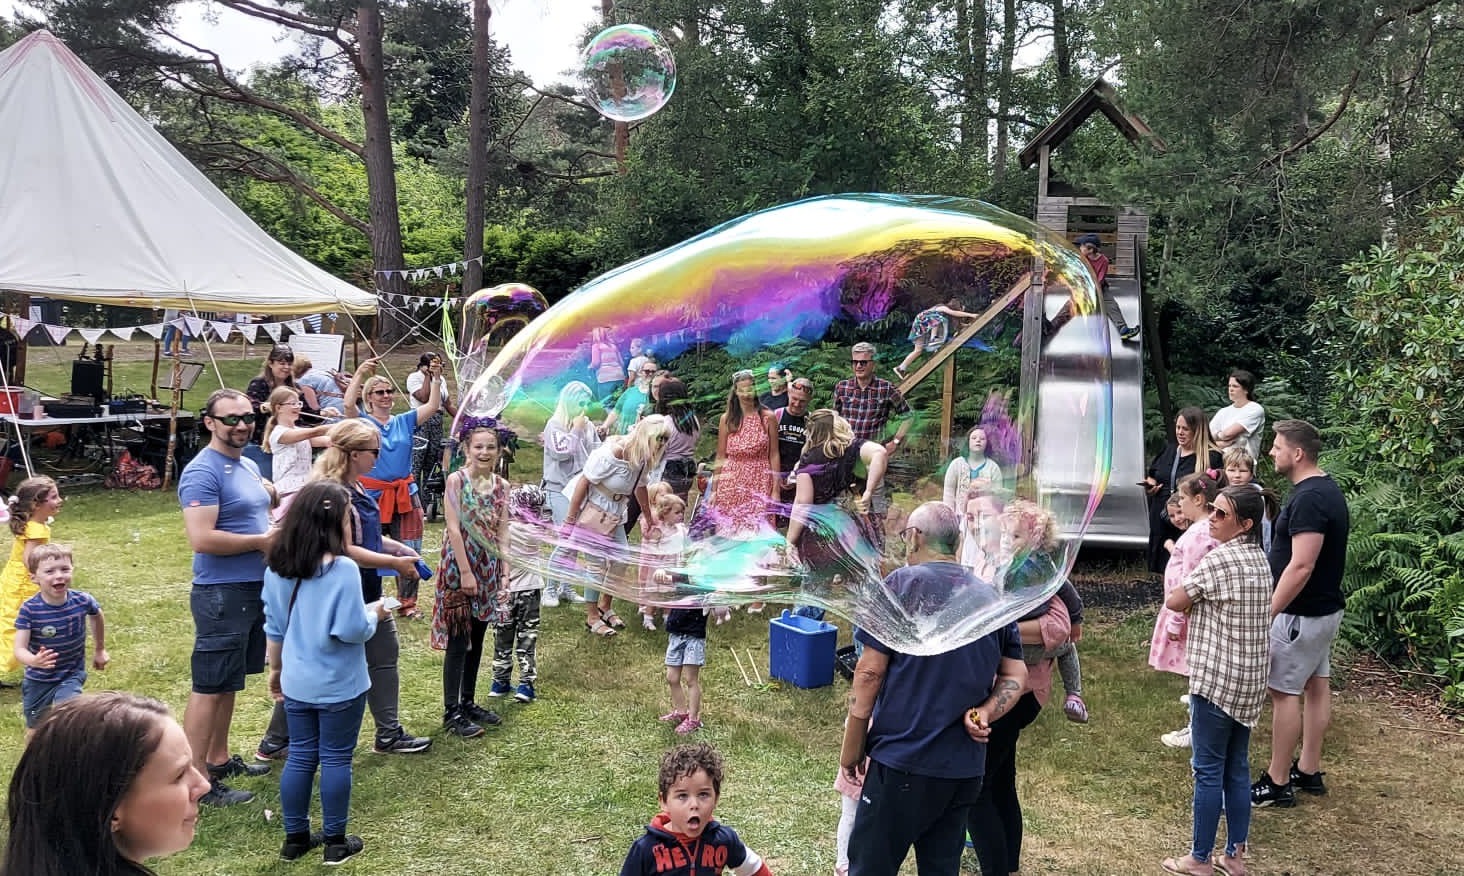 group of people enjoying our summer festival with giant bubble